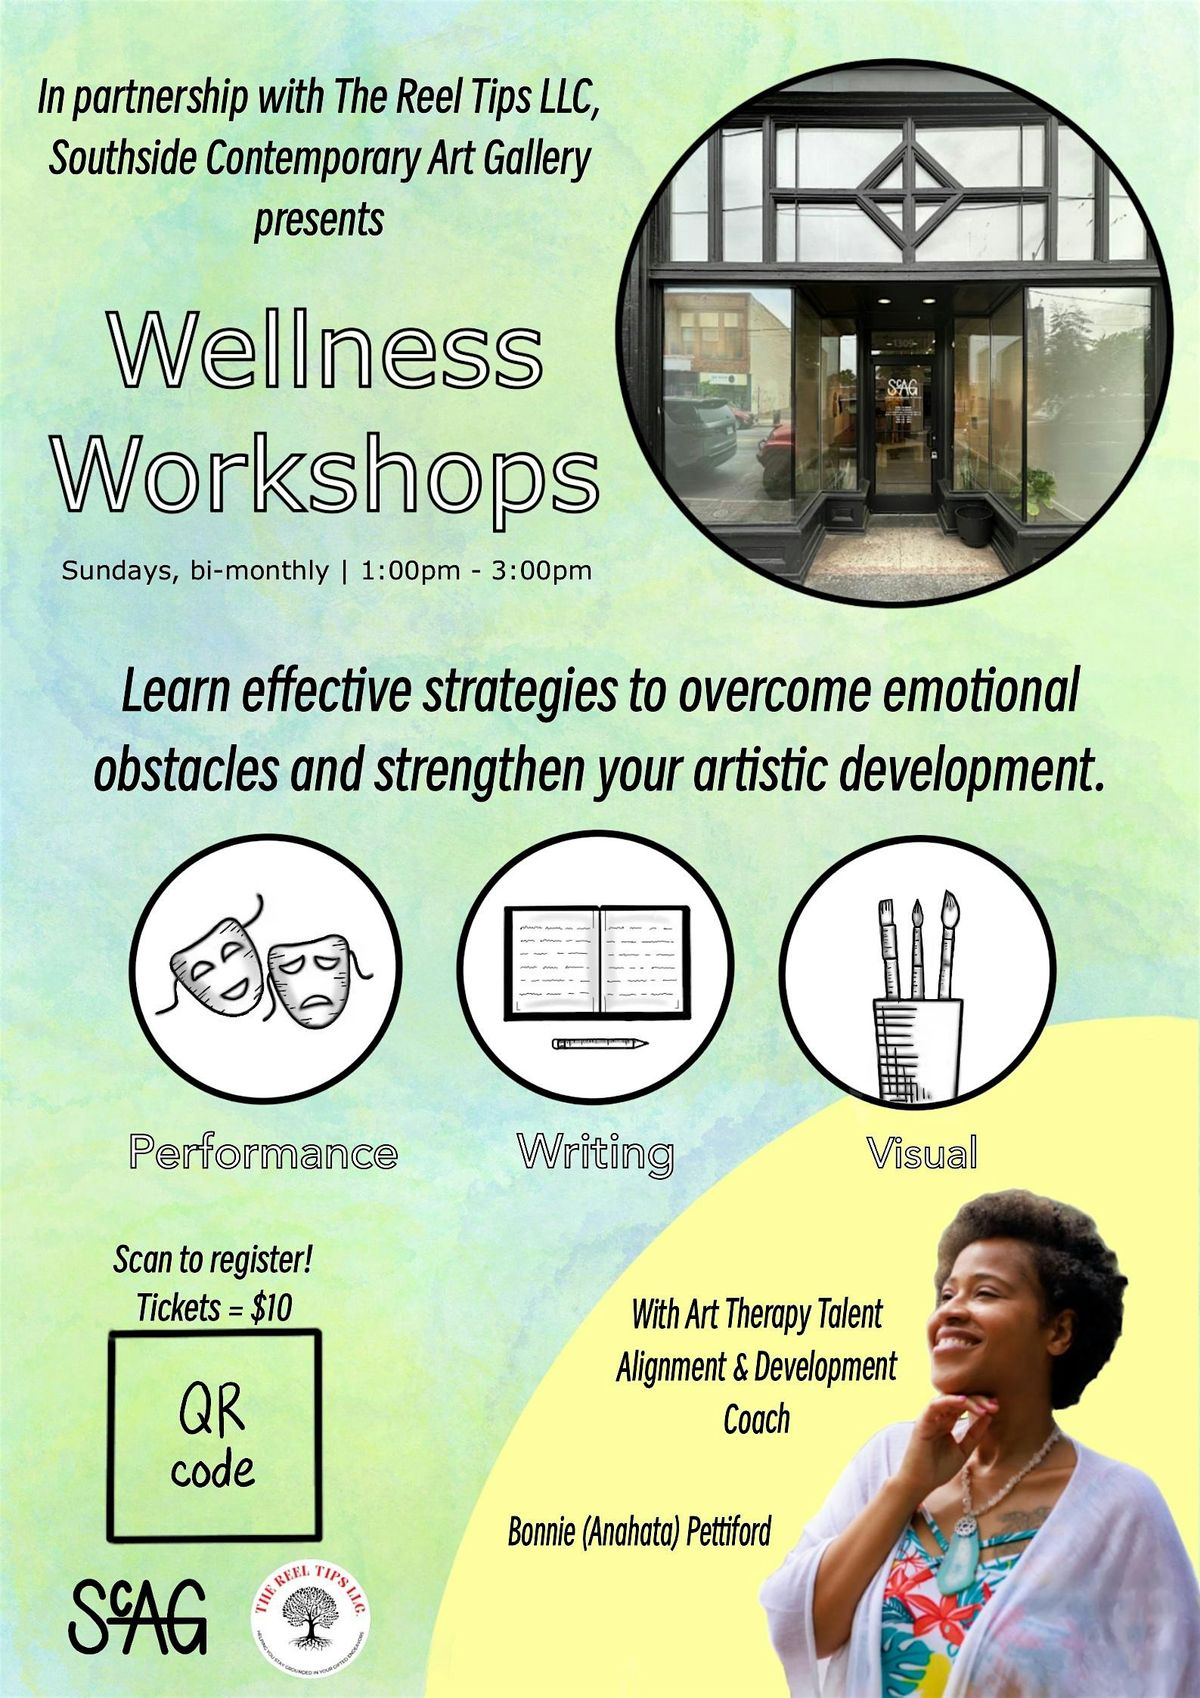 Wellness Workshops at Southside Contemporary